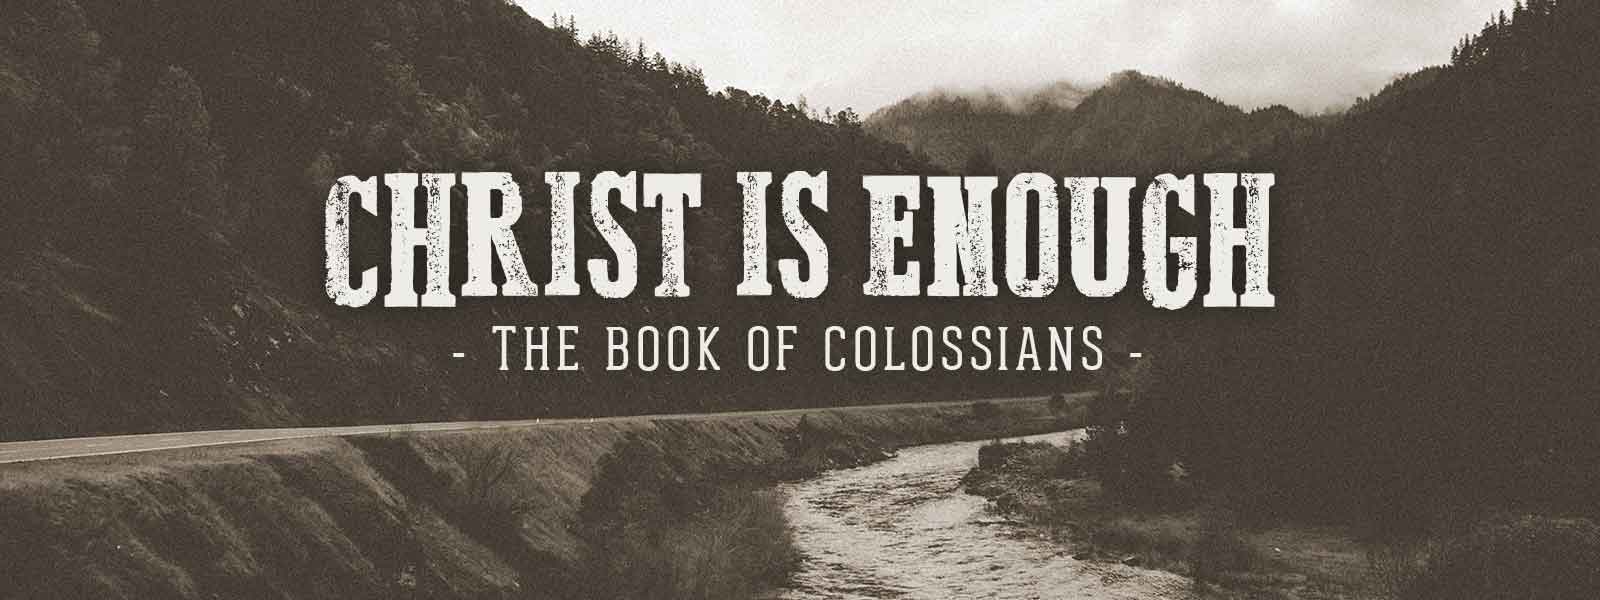 Colossians: Christ is Enough